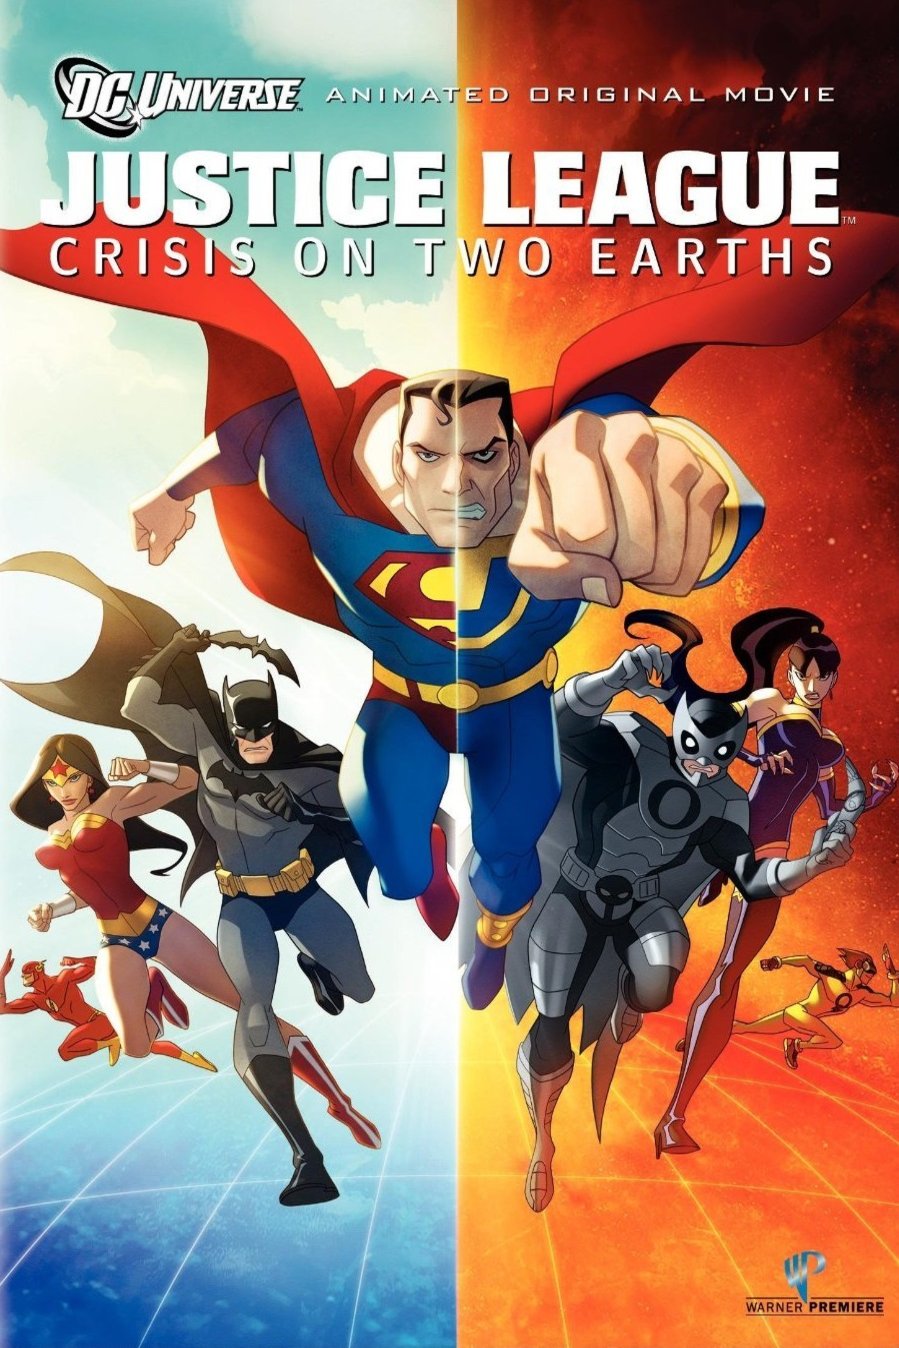 Poster of the movie Justice League: Crisis on Two Earths